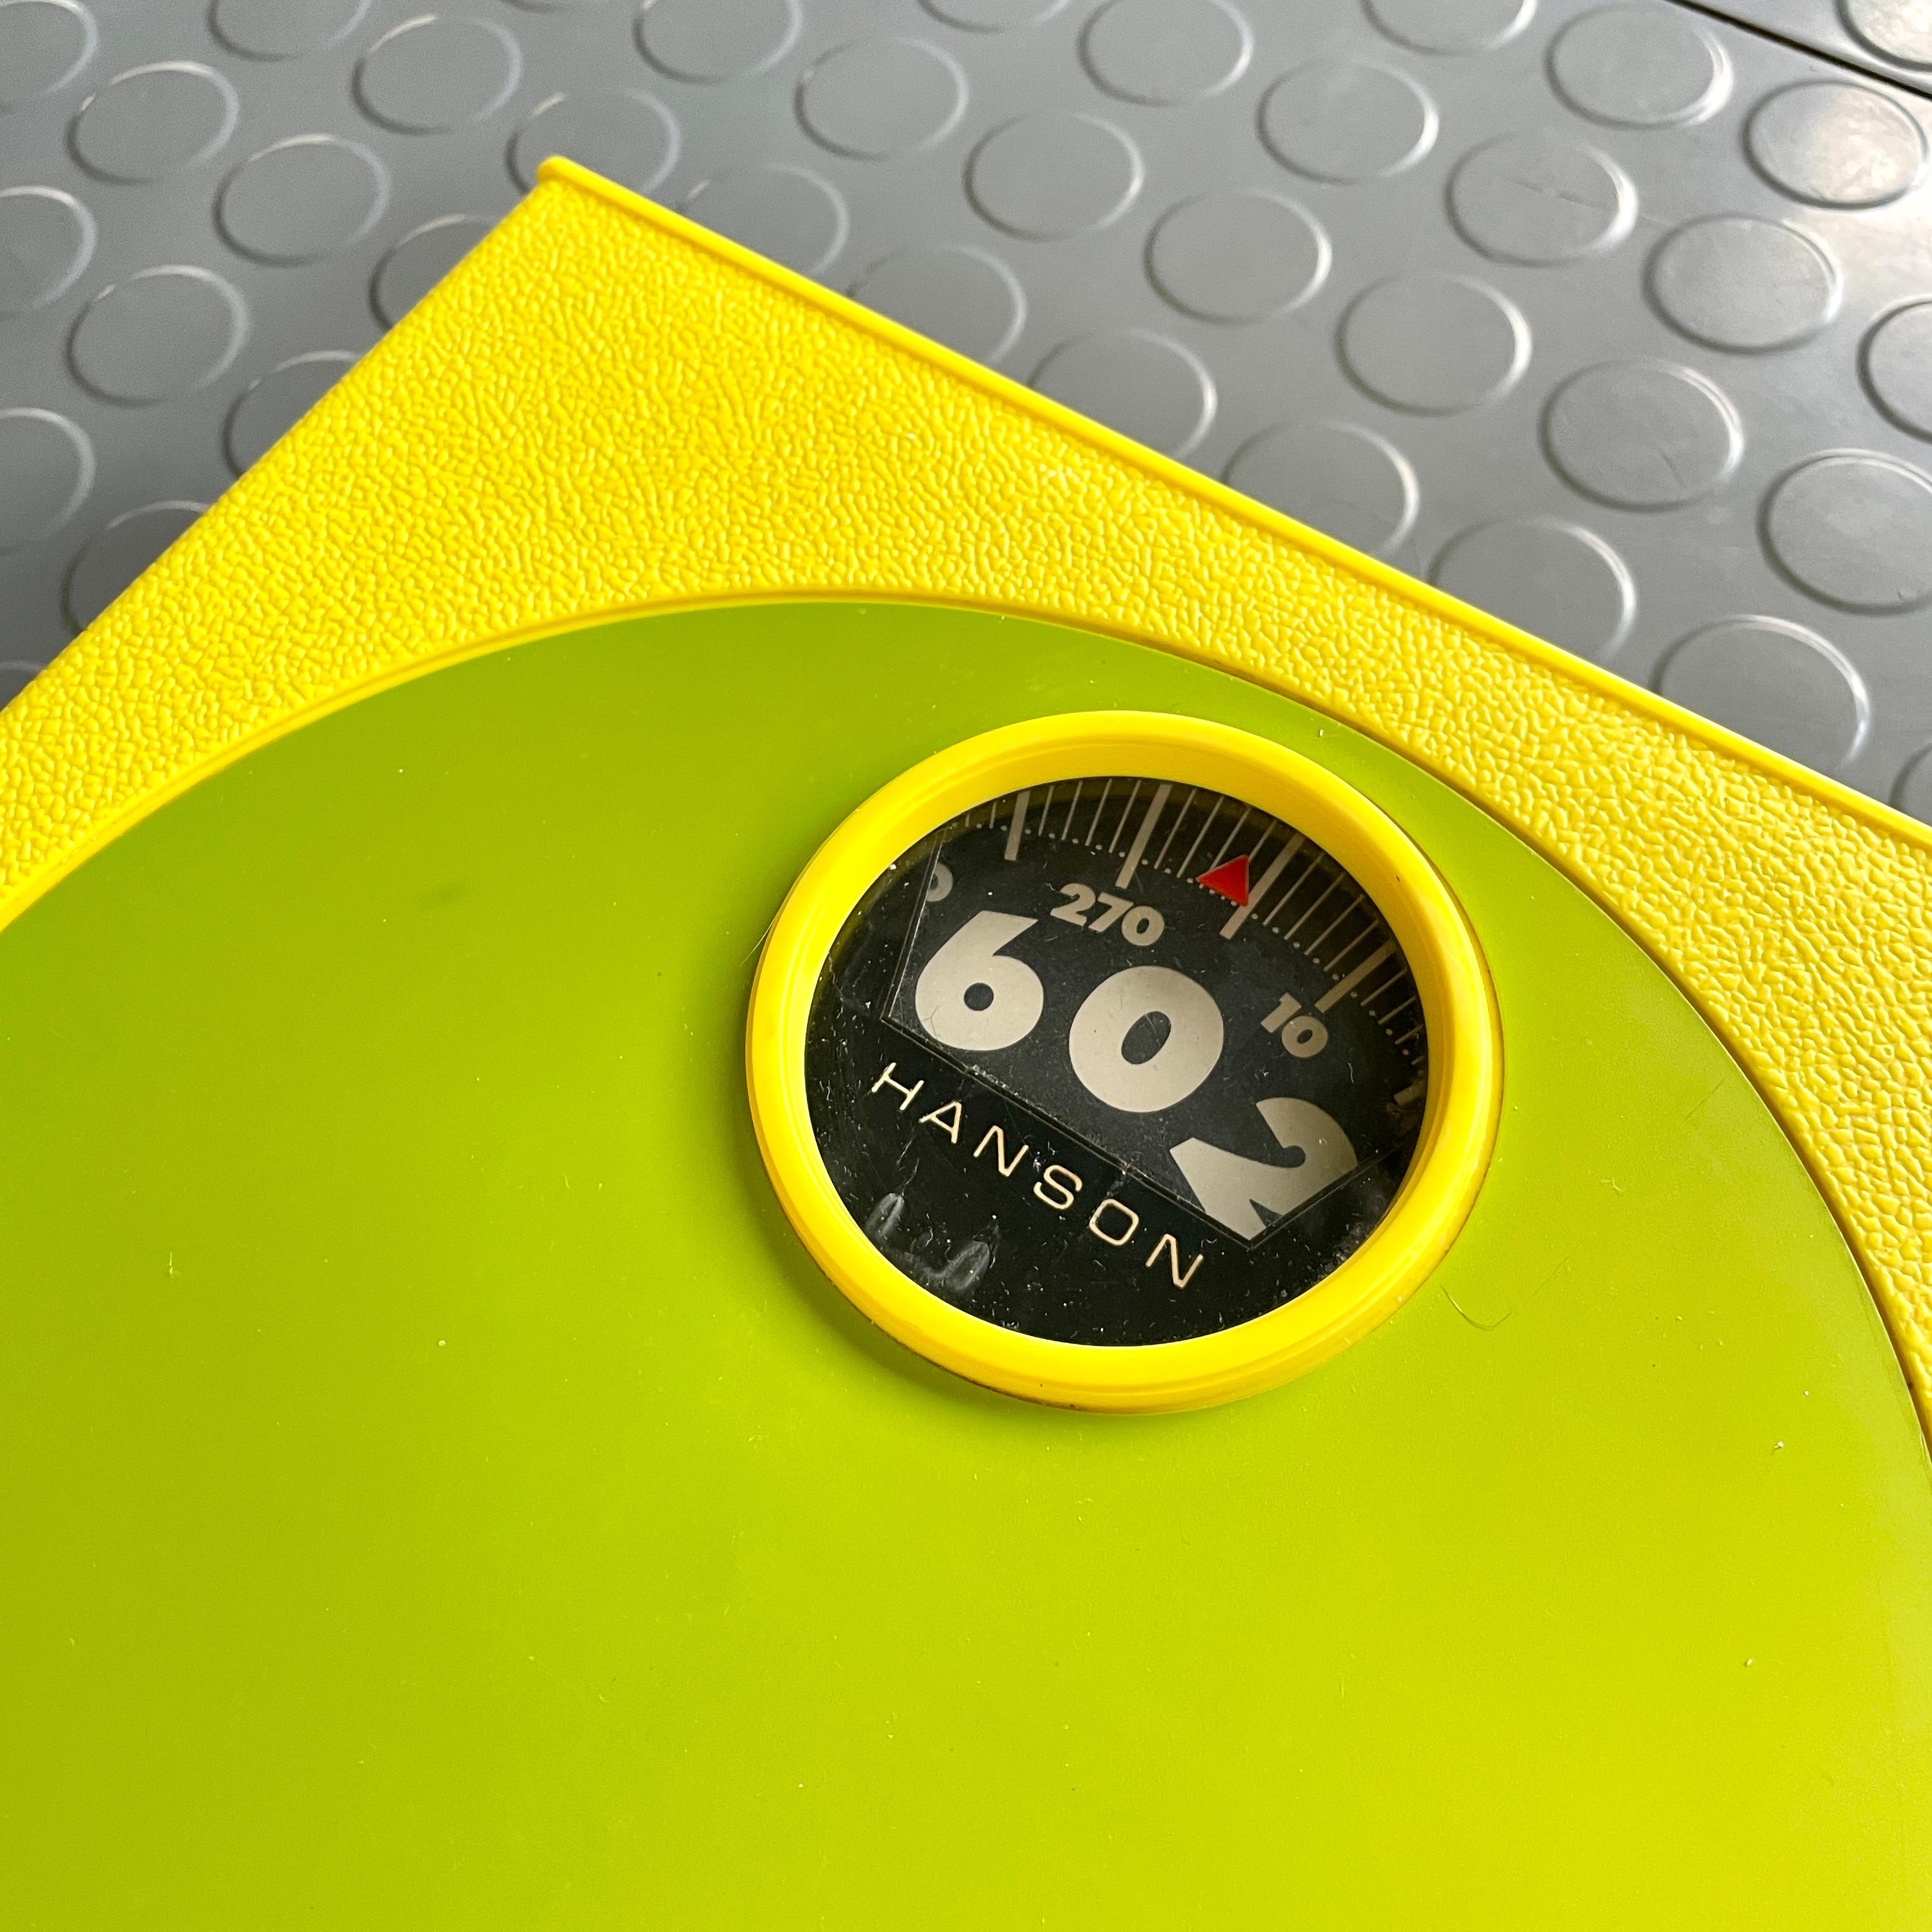 Mid-20th Century 1960s Bathroom Scale by Hanson in Lemon Yellow Lime Green Dot Mid-Century Mod For Sale